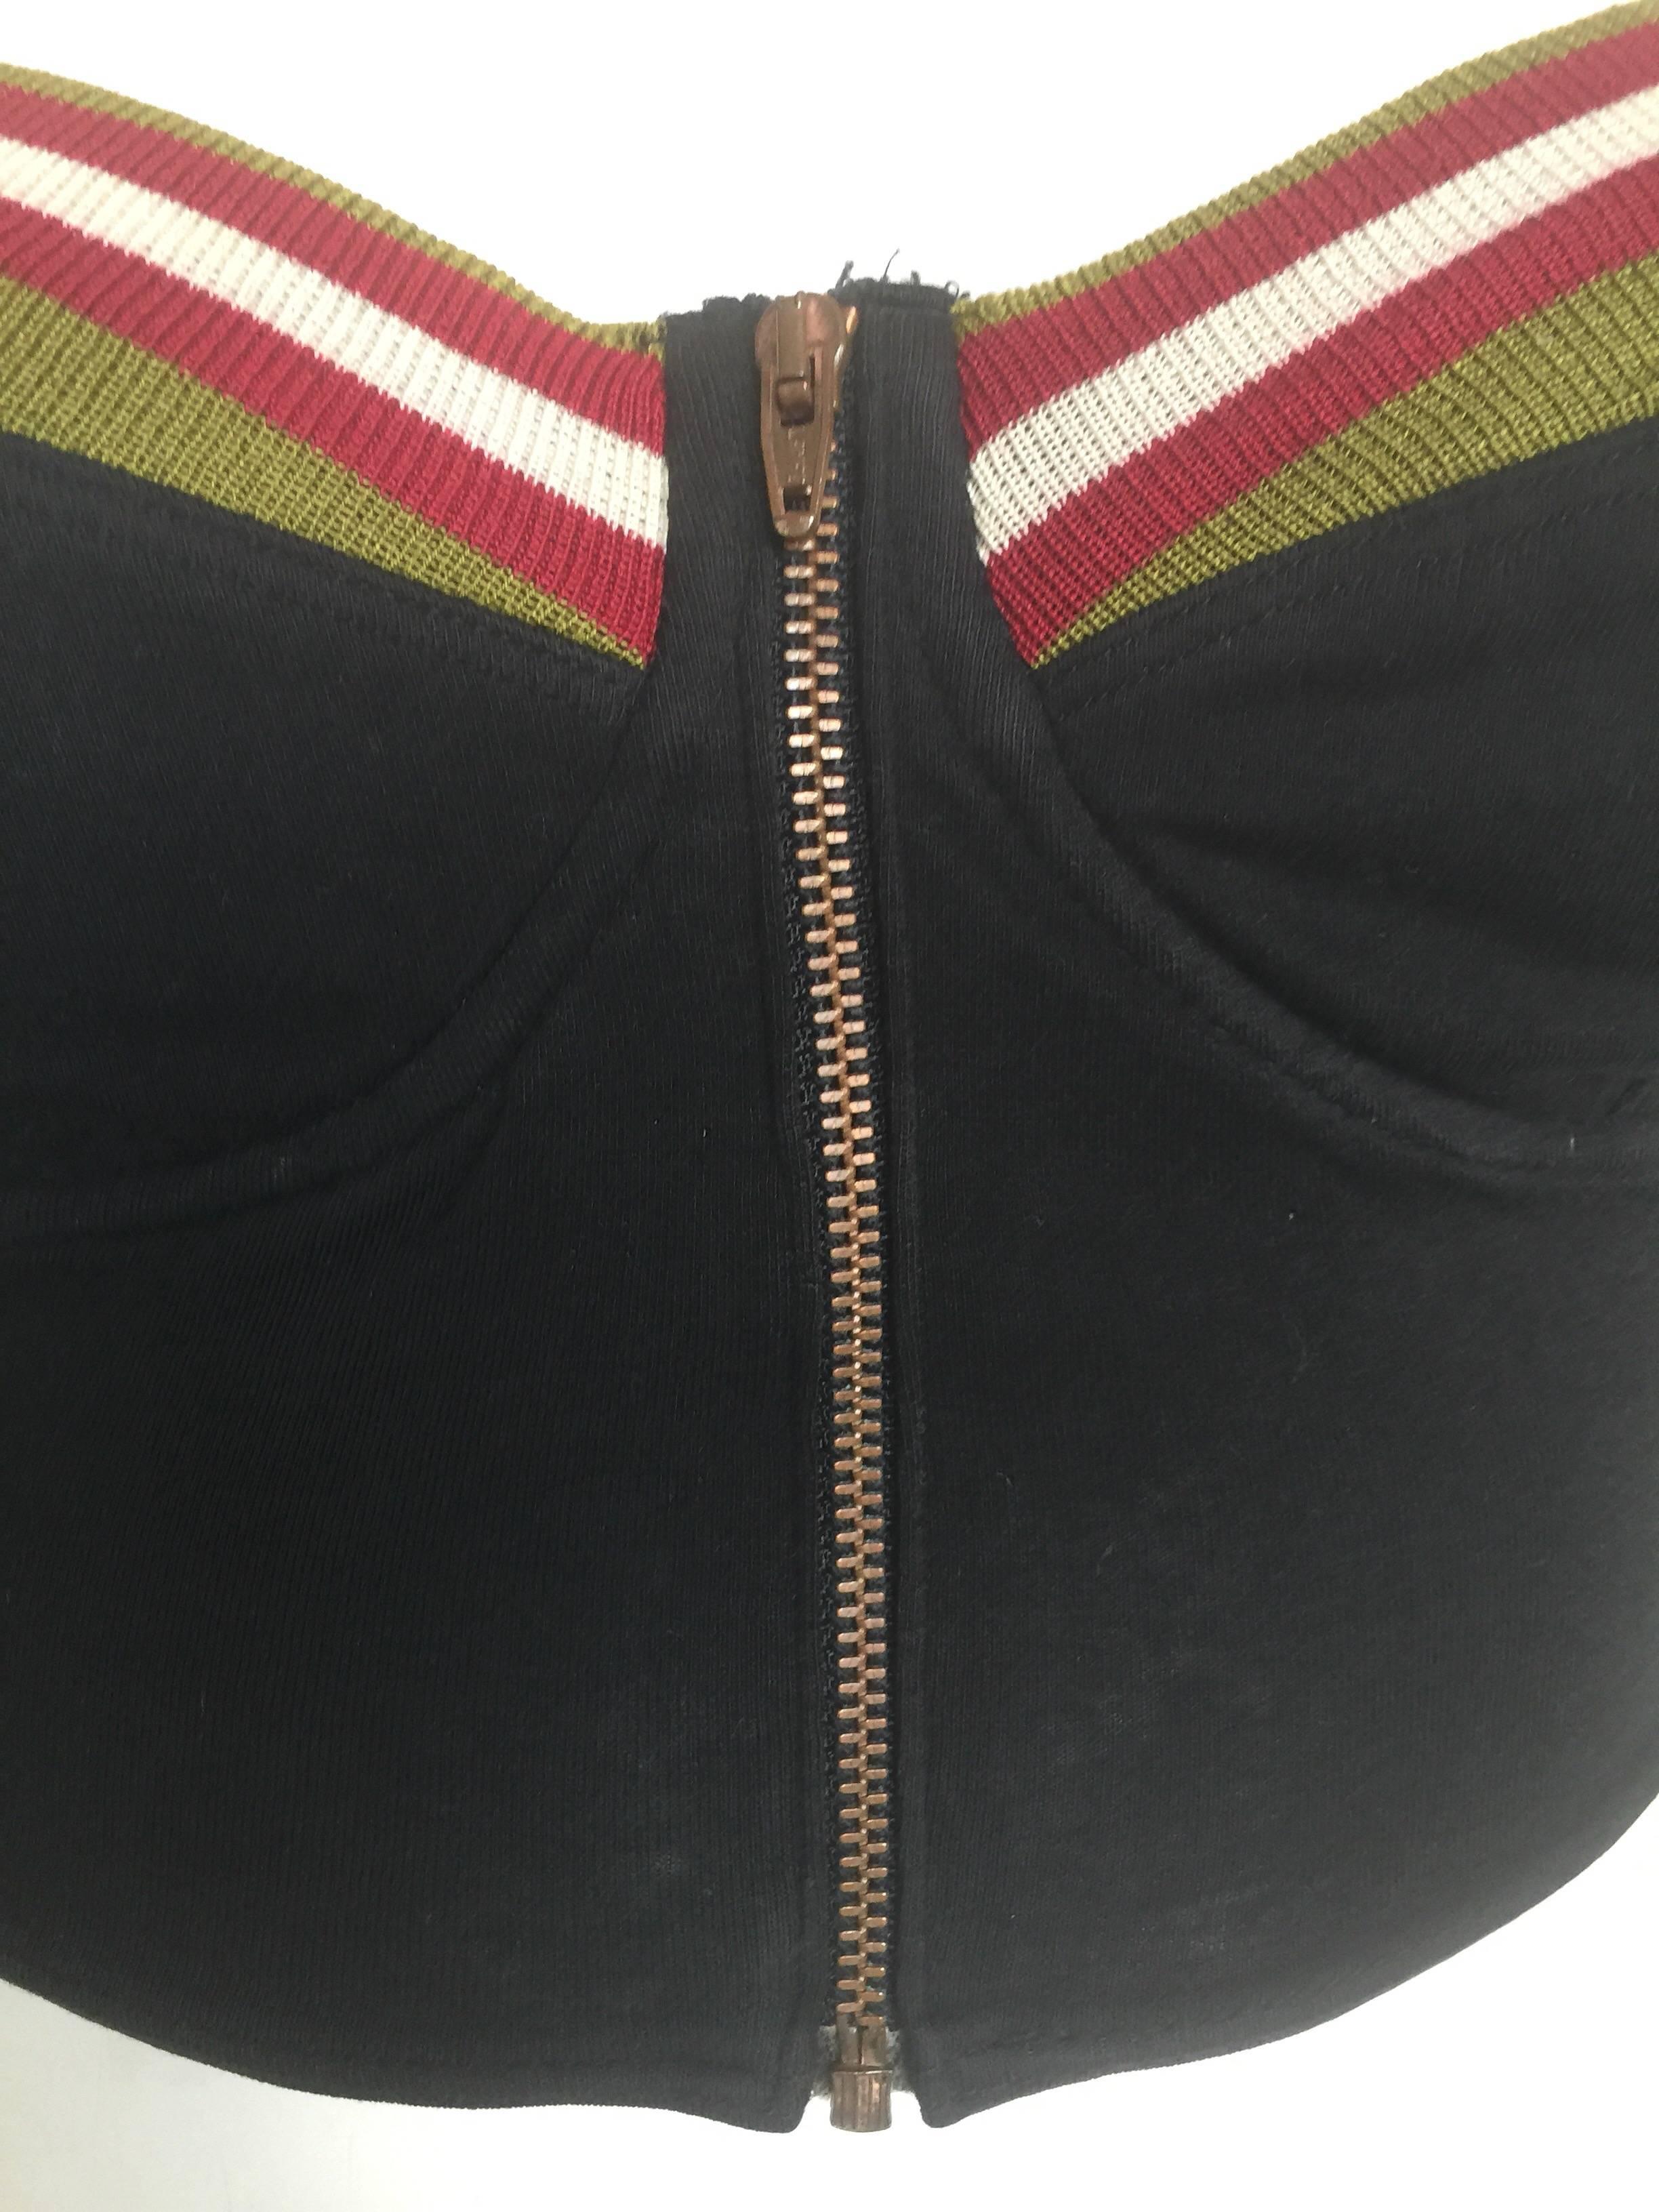 This 1980s Jean Paul Gaultier Junior crop top is listed a 44 but has been altered to fit more like a size 38.  Please check measurements.  It has a from zipper opening and elastic criss cross straps. 